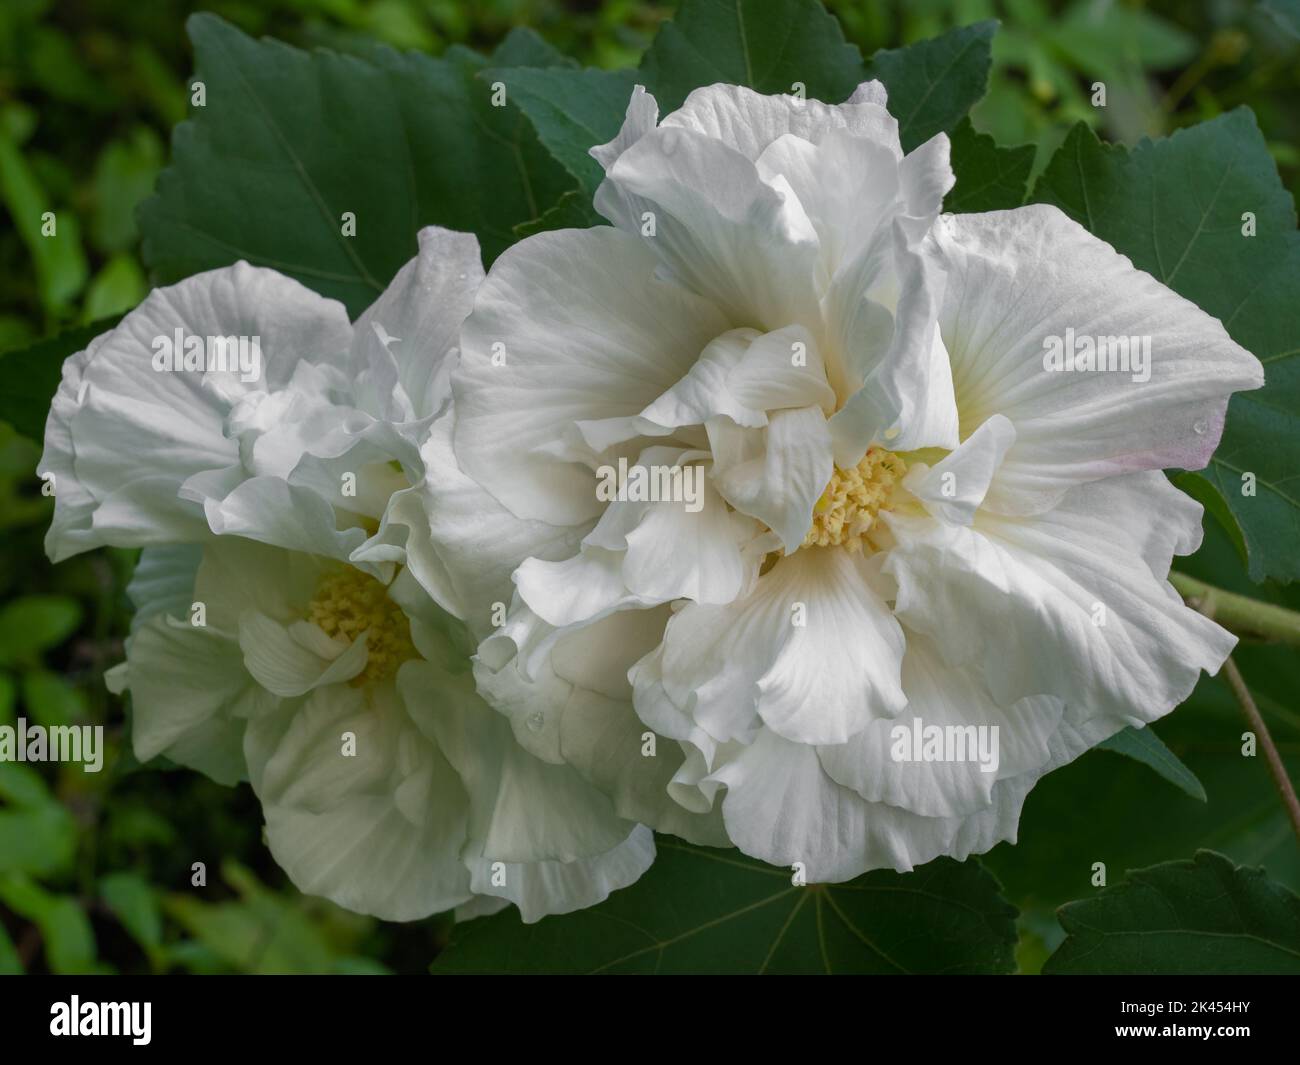 Closeup view of fresh white hibiscus mutabilis aka Confederate rose or Dixie rosemallow flowers in outdoor tropical garden on natural background Stock Photo